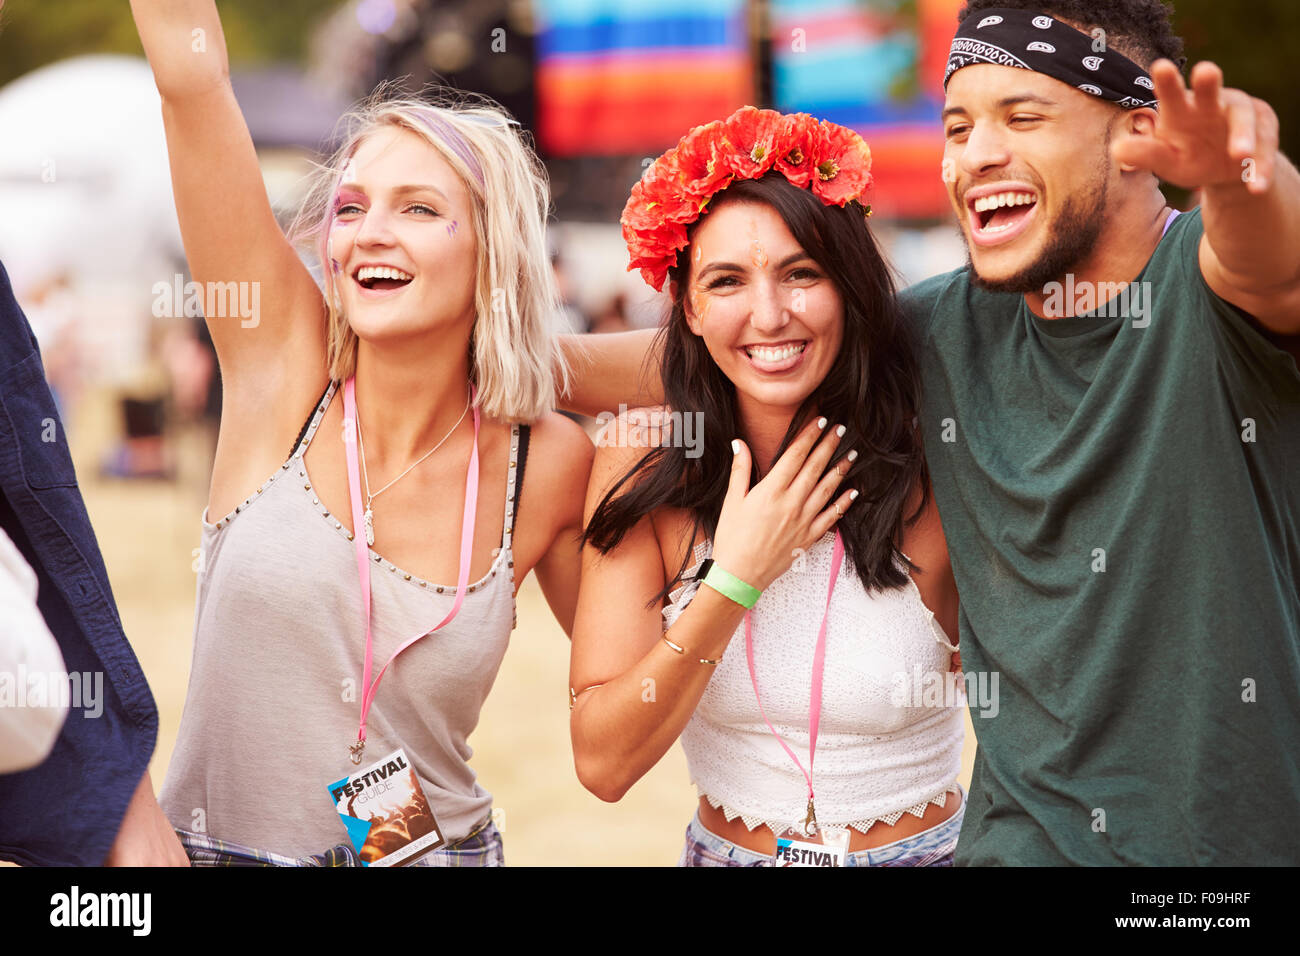 Three friends in the audience at a music festival Stock Photo